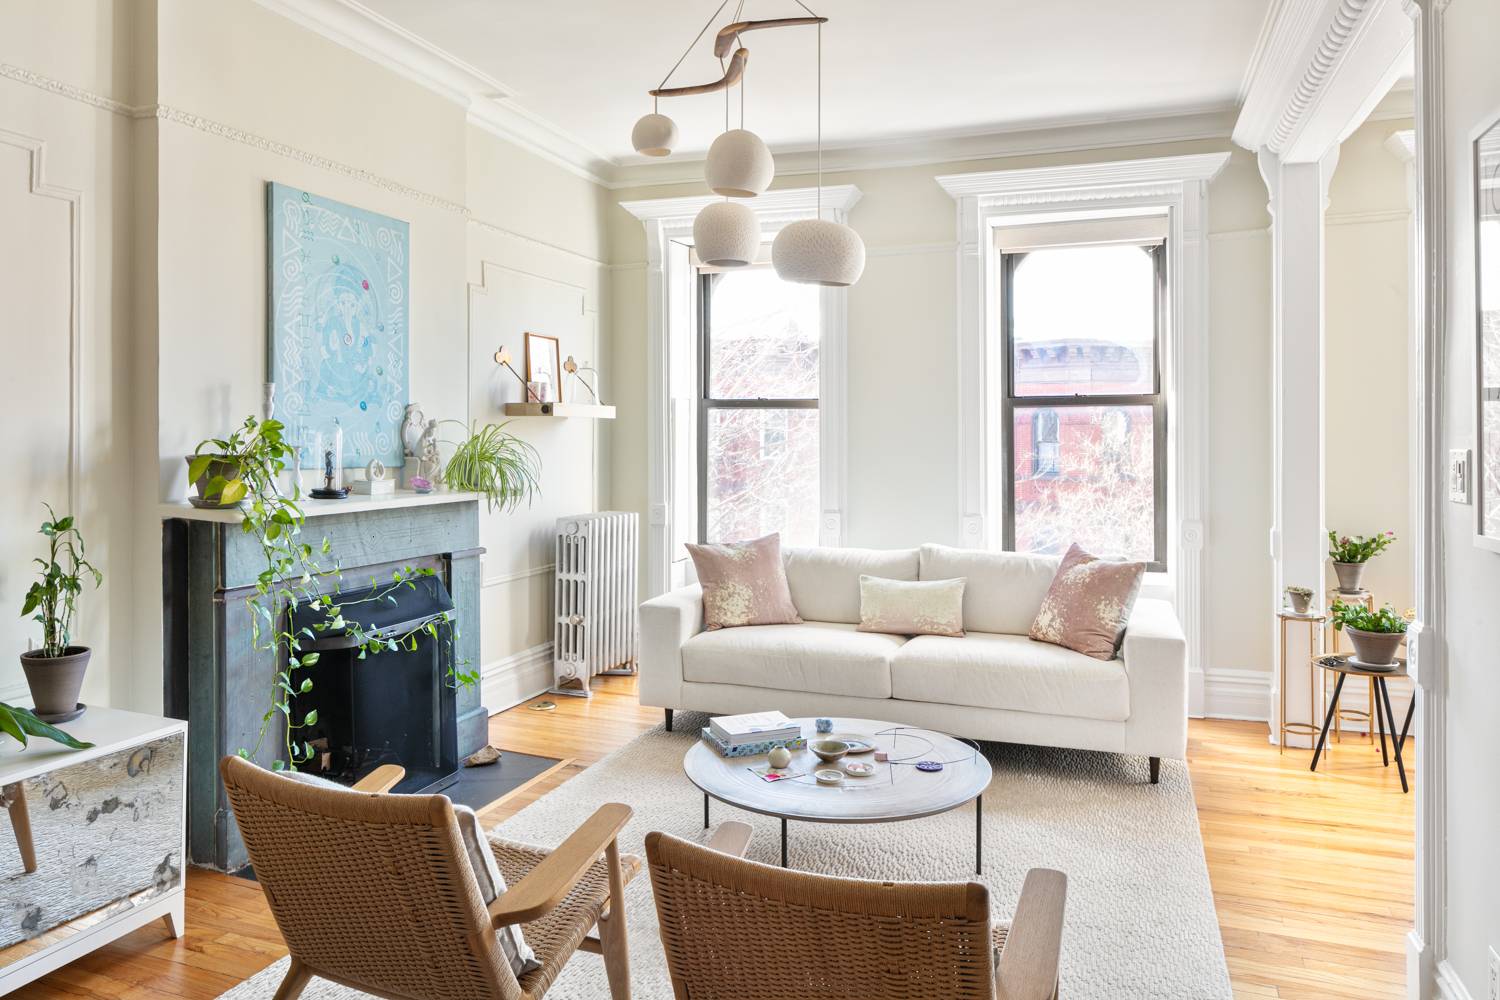 Simply EXQUISITE. This beautifully renovated convertible three or four bedroom, Park Slope cooperative is a serene top floor haven boasting magnificent light, architectural detail and updates throughout.